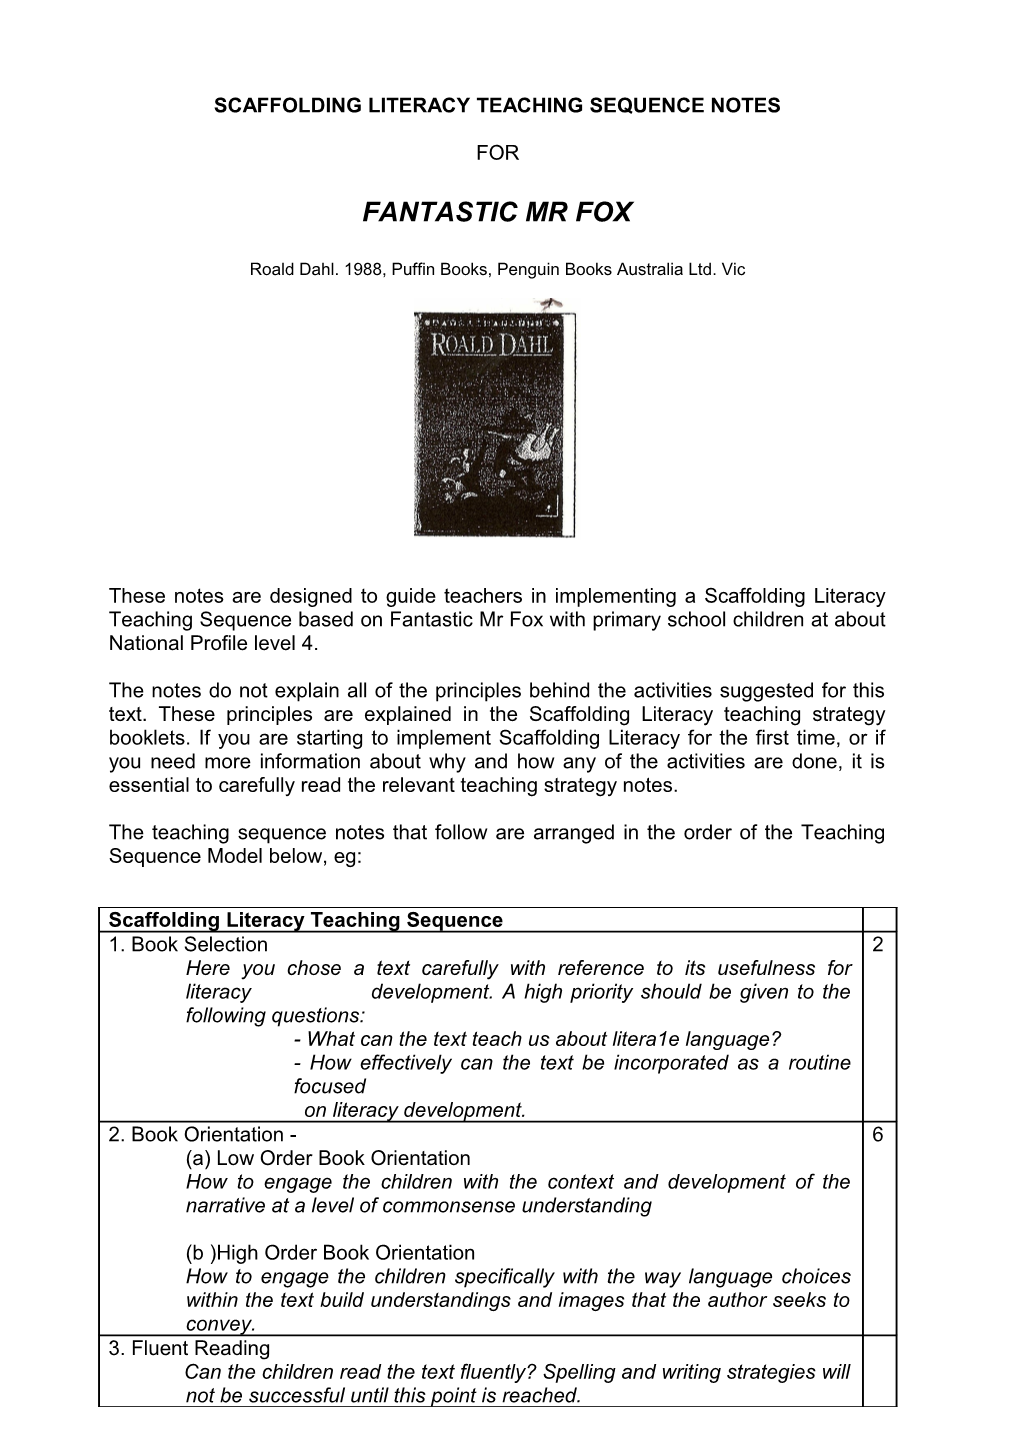 Scaffolding Literacy Teaching Sequence Notes